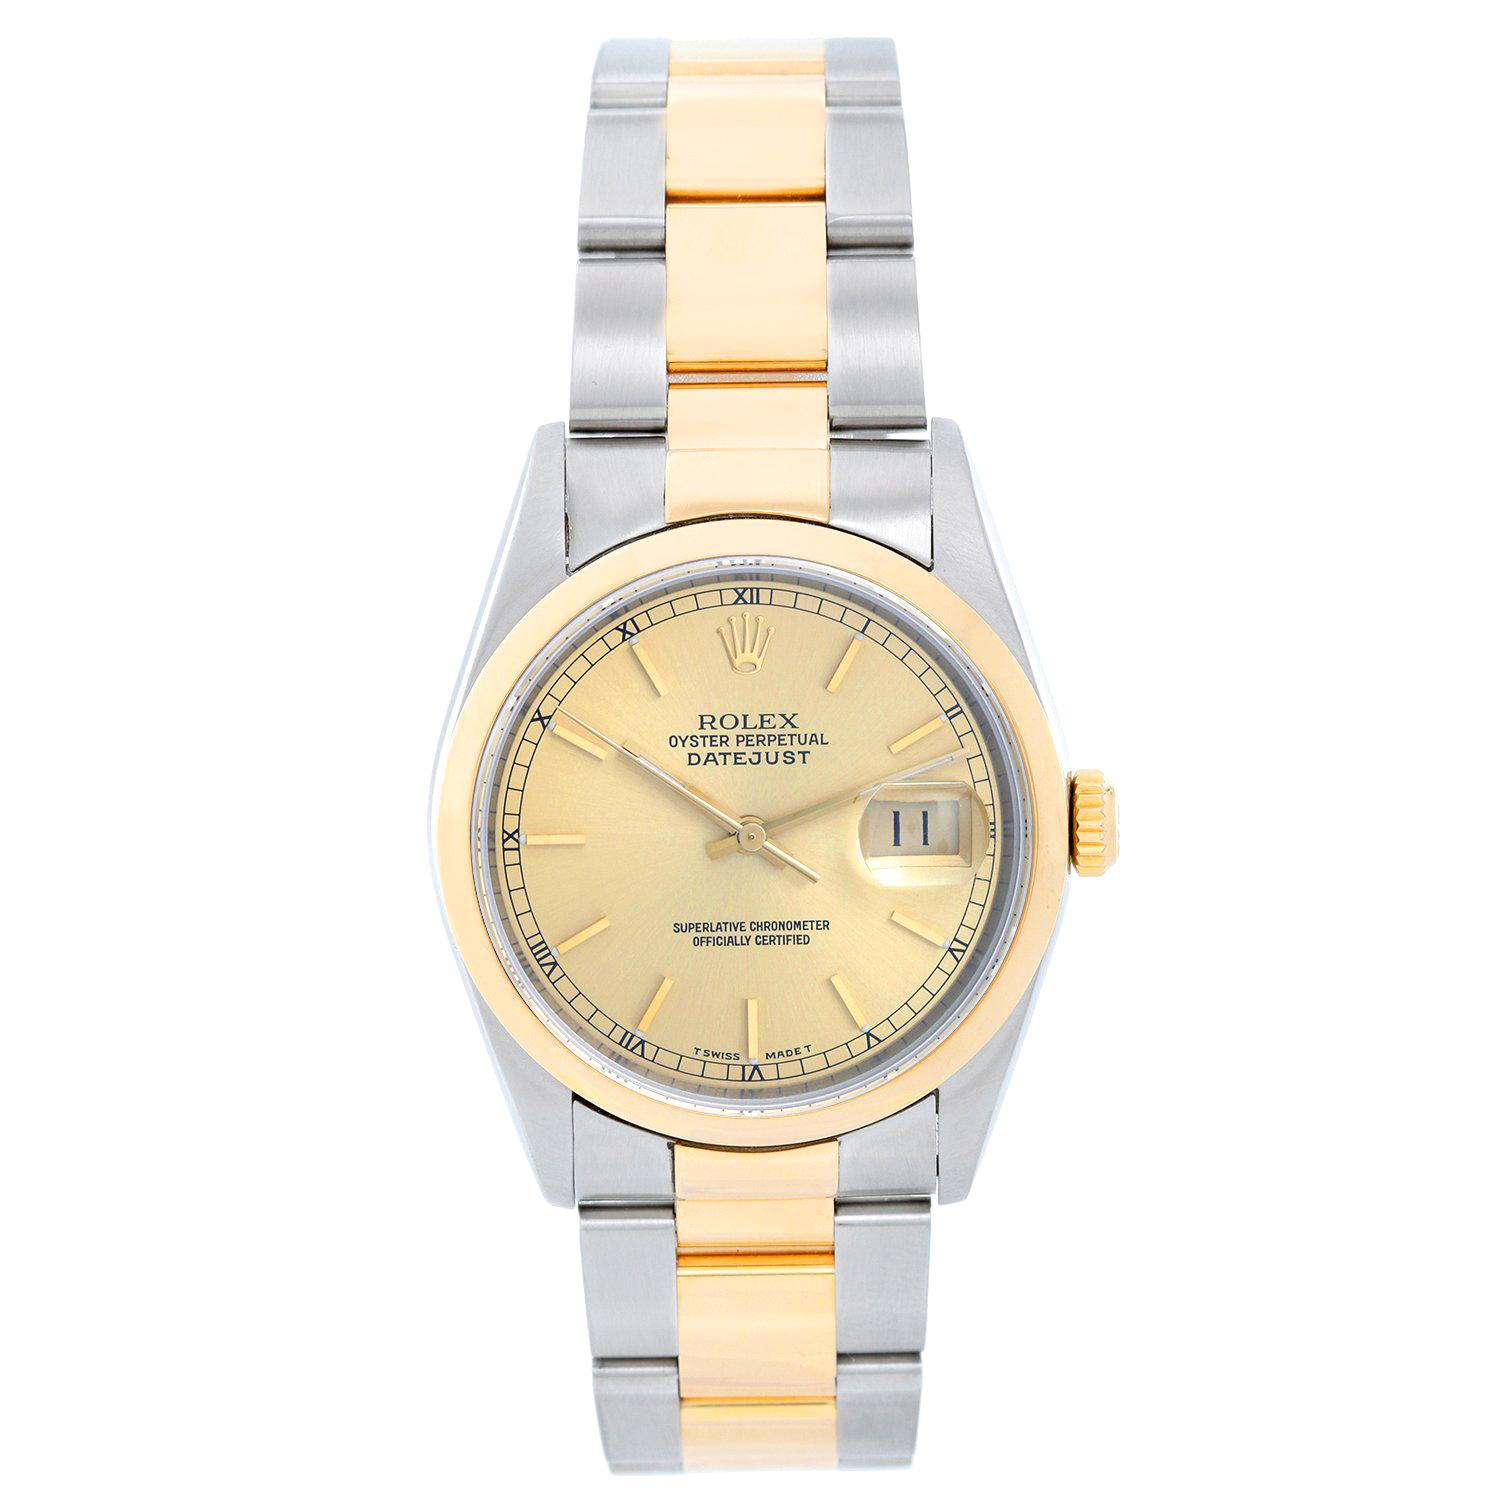 Rolex Datejust Men's 2-Tone Steel and Gold Watch 16203